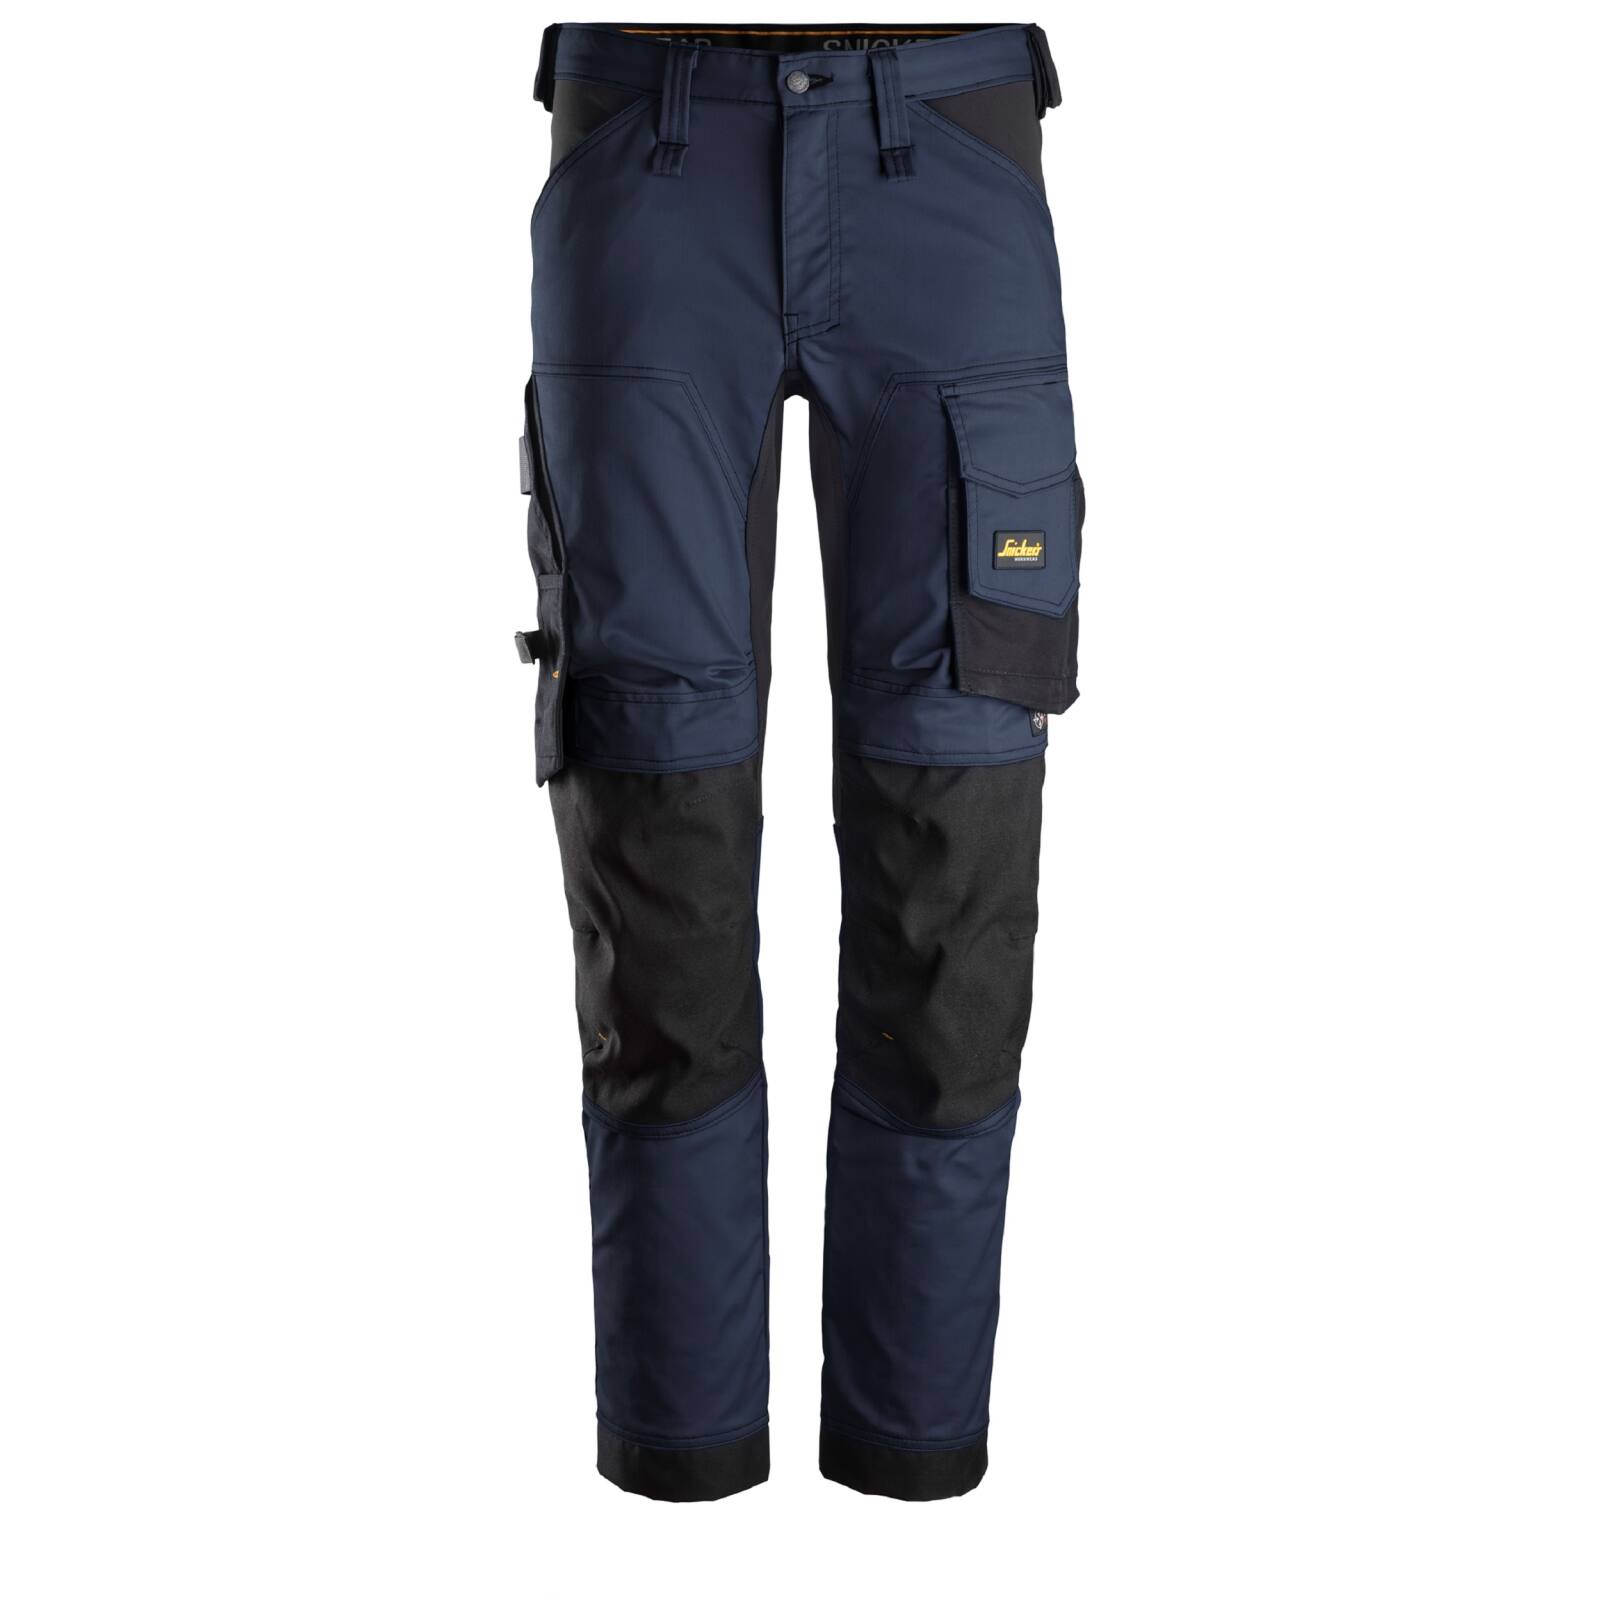 New loose-fit stretch trousers from Snickers Workwear - Professional Builder